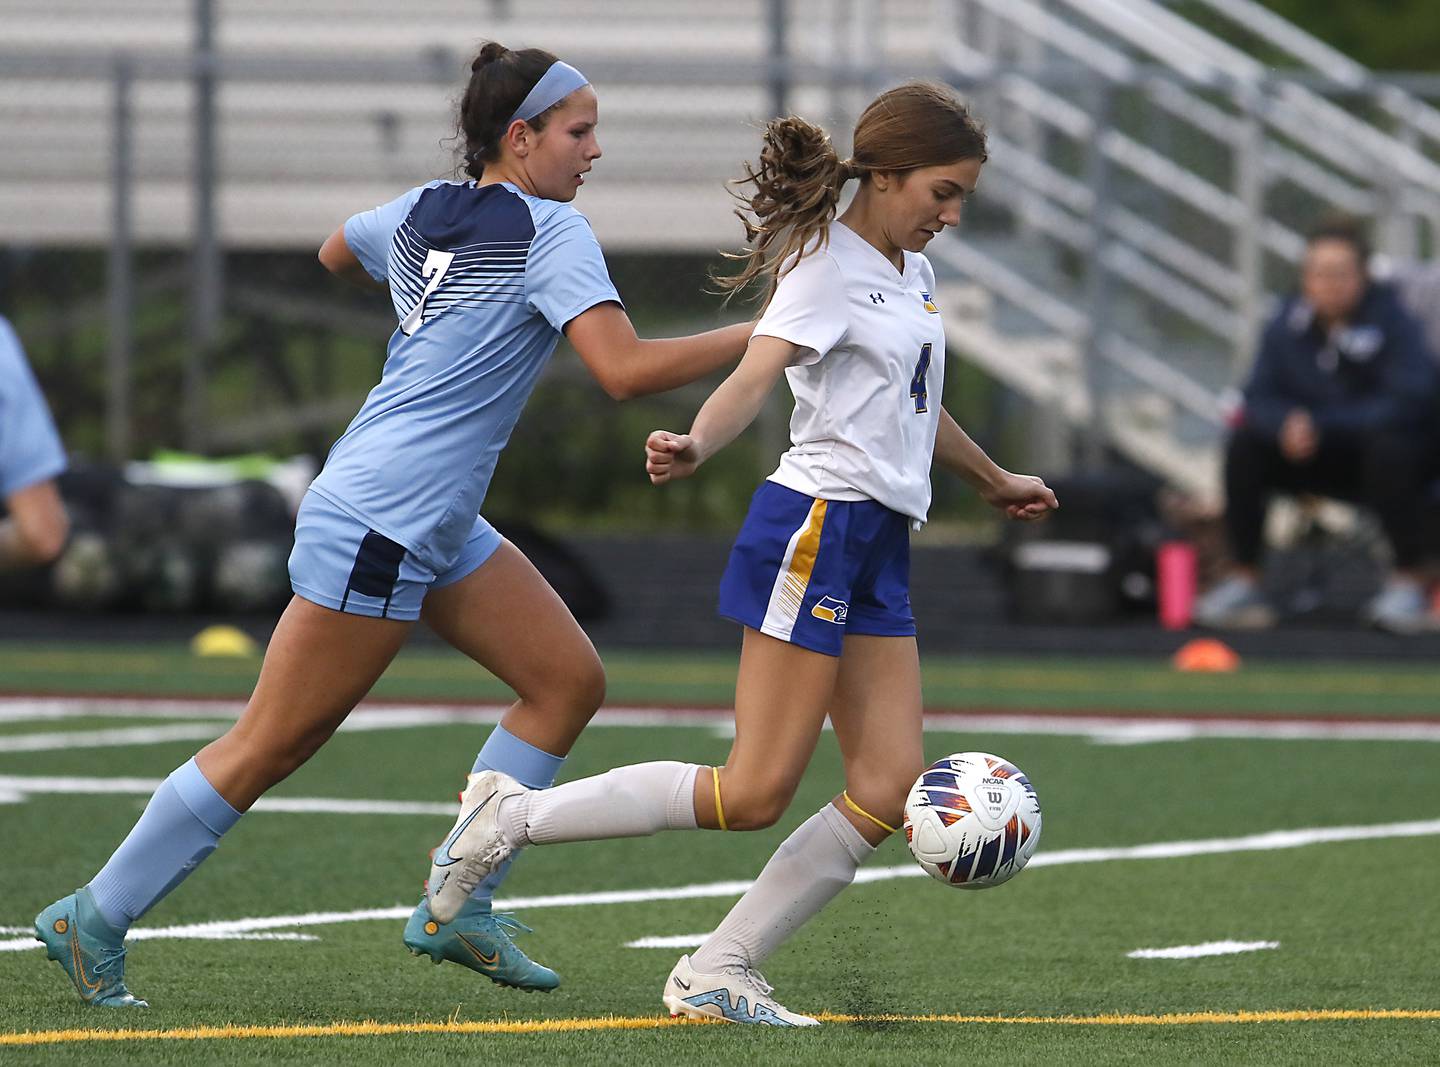 Johnsburg's Ava Jablonski tries to control the ball as she is defended by Willows’ Erin Mongoven during a IHSA Division 1 Richmond-Burton Sectional semifinal soccer match Tuesday, May 16, 2023, at Richmond-Burton High School.